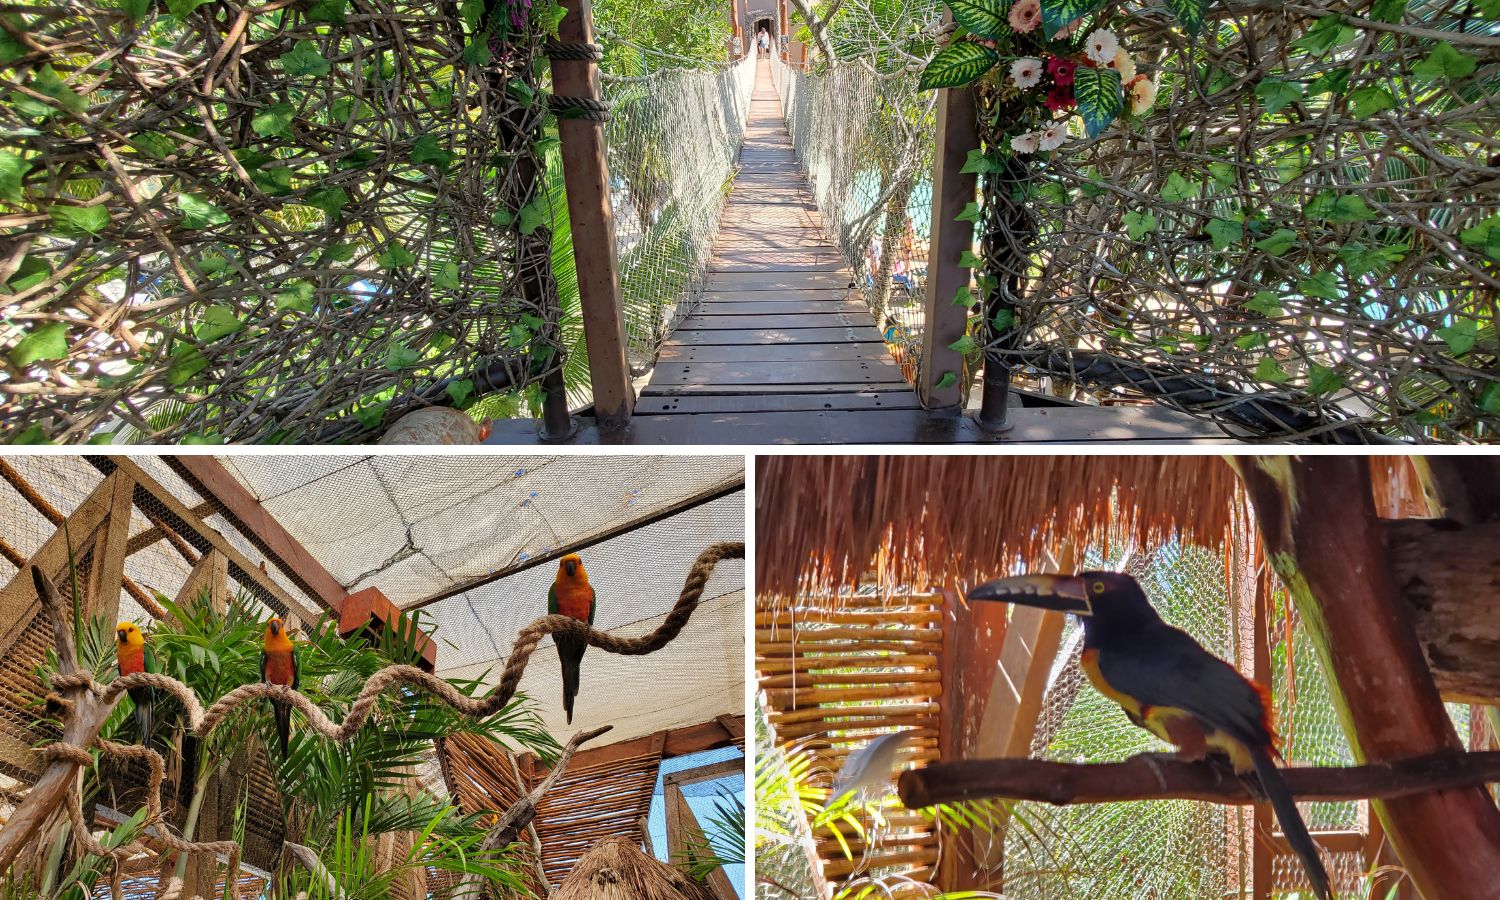 There are 8 bird habitats in the Aviarius and some great views along the walkway. 